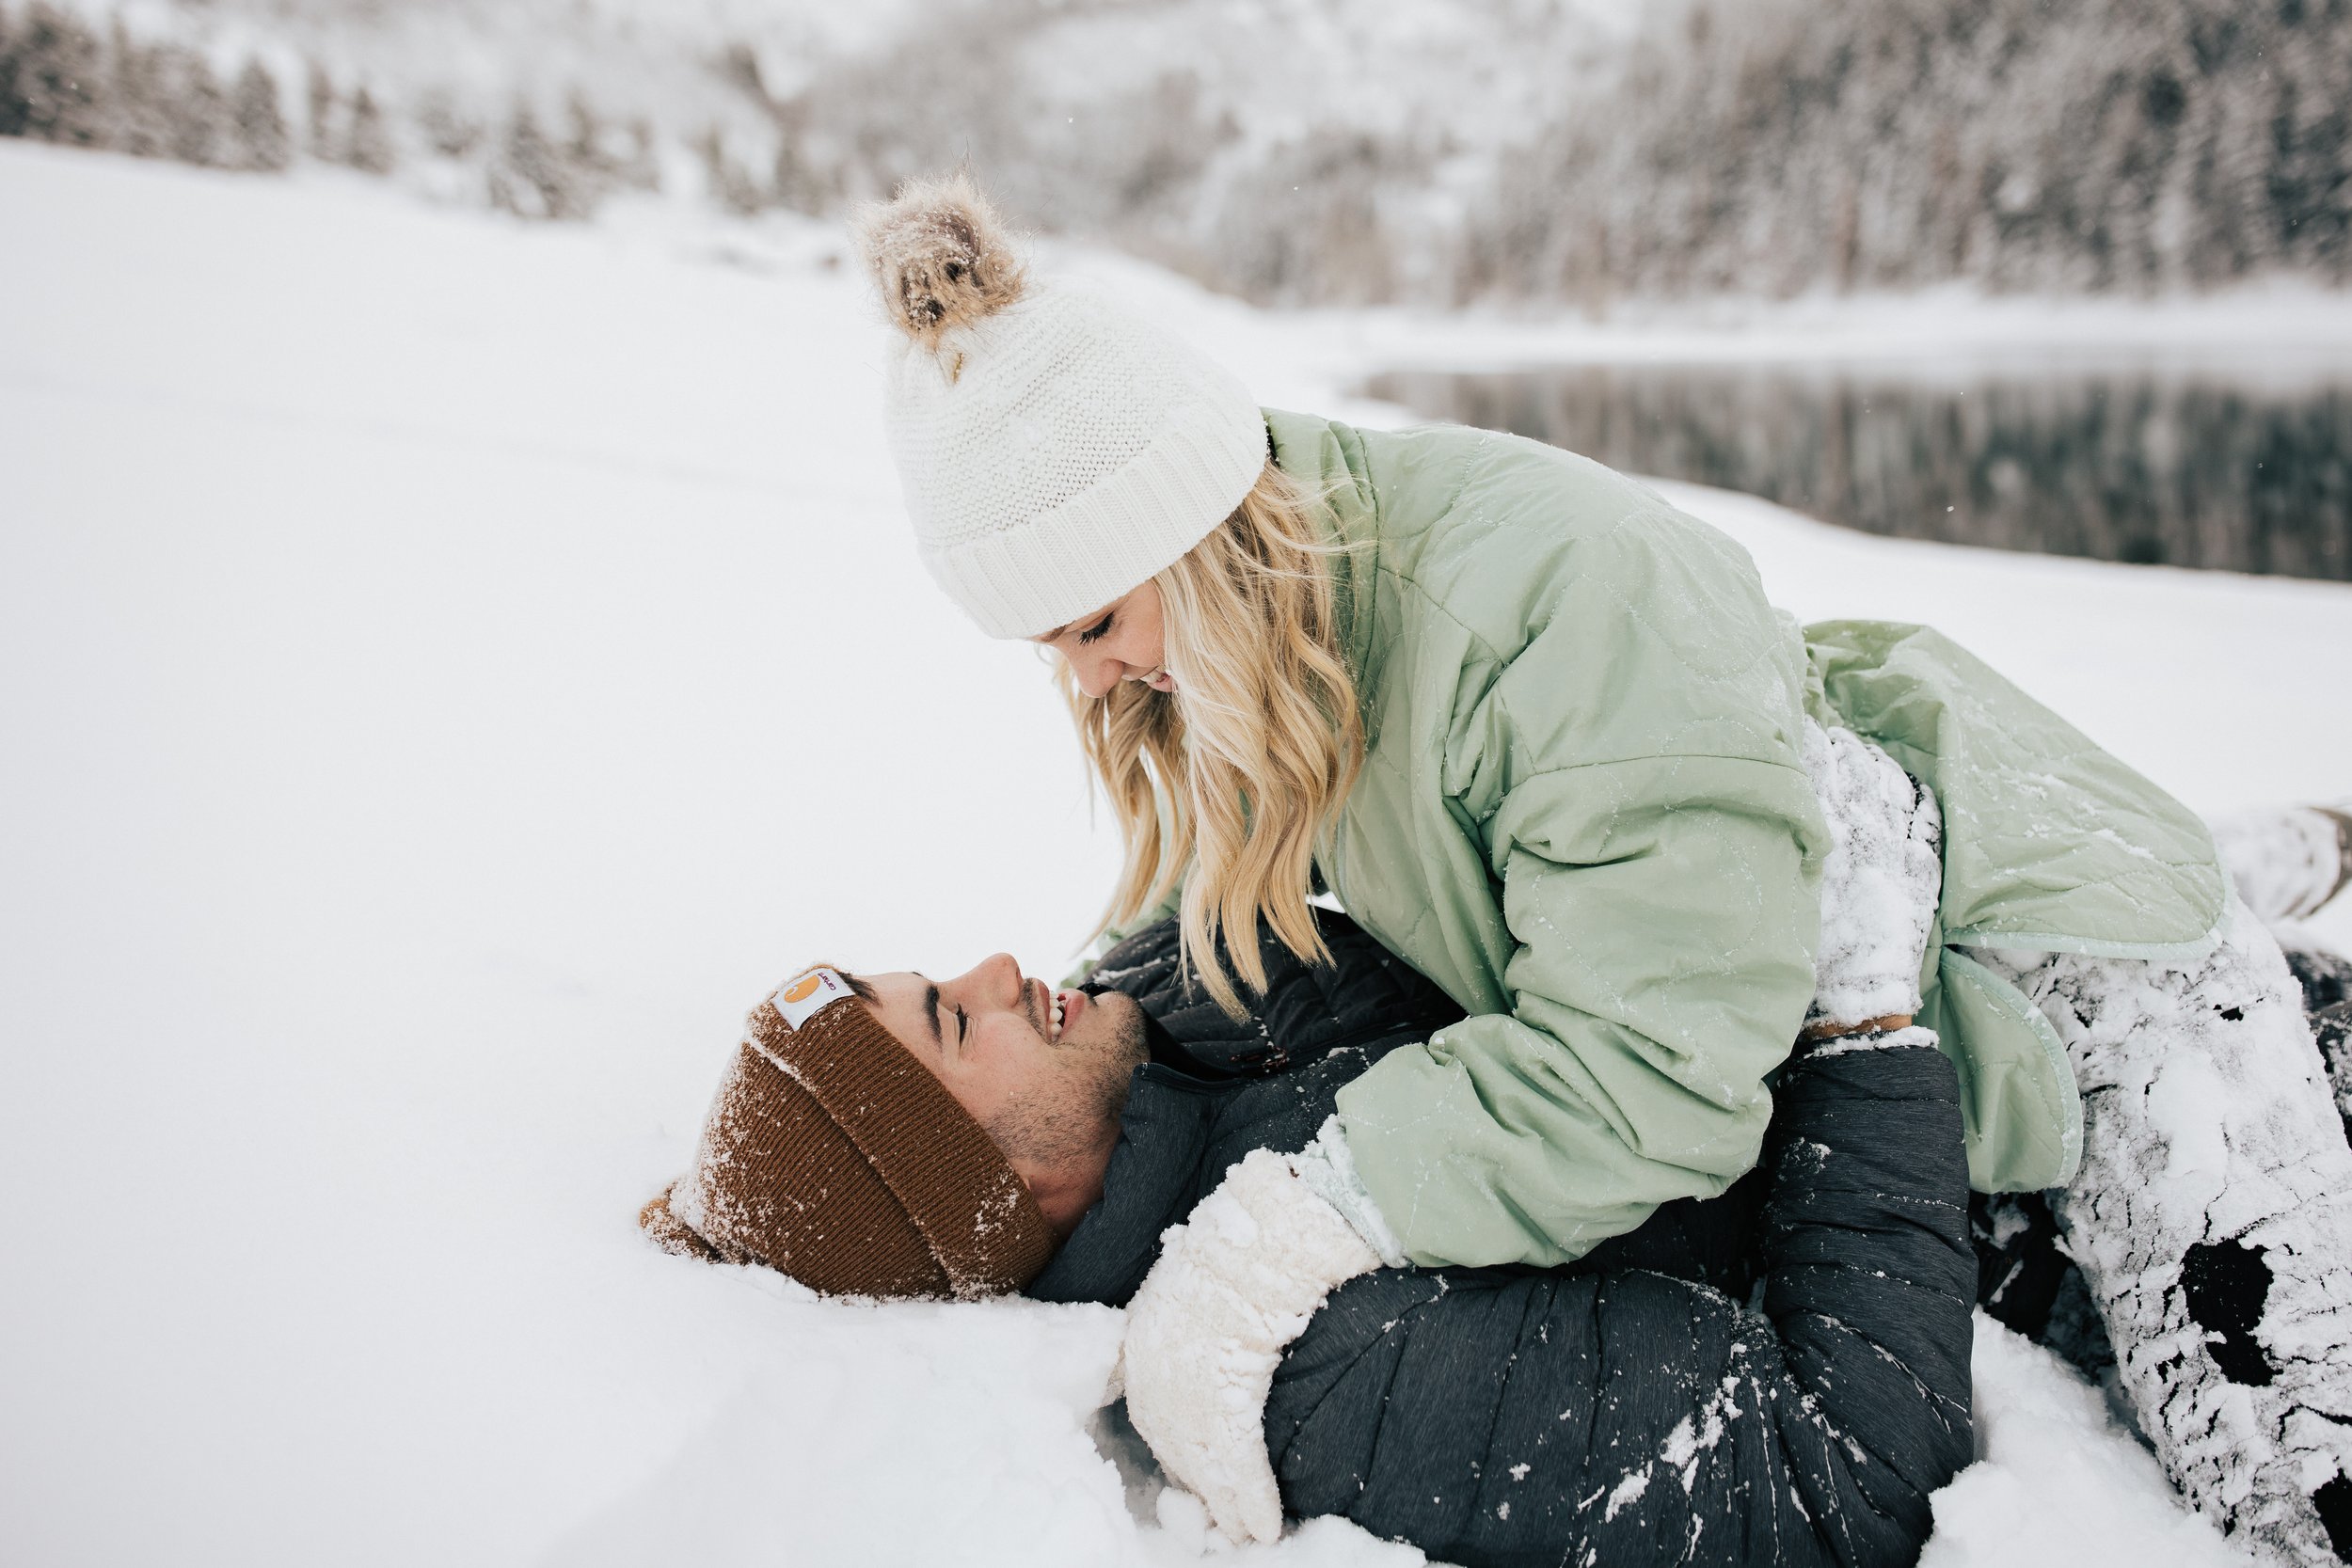  Winter engagement session at Tibble Fork Reservoir near Park City, Utah. Couple playing in the snow Snowball fight during couples photoshoot in the Utah mountains couple hugs as it's snowing covered in snowflakes engagement session winter outfit ins